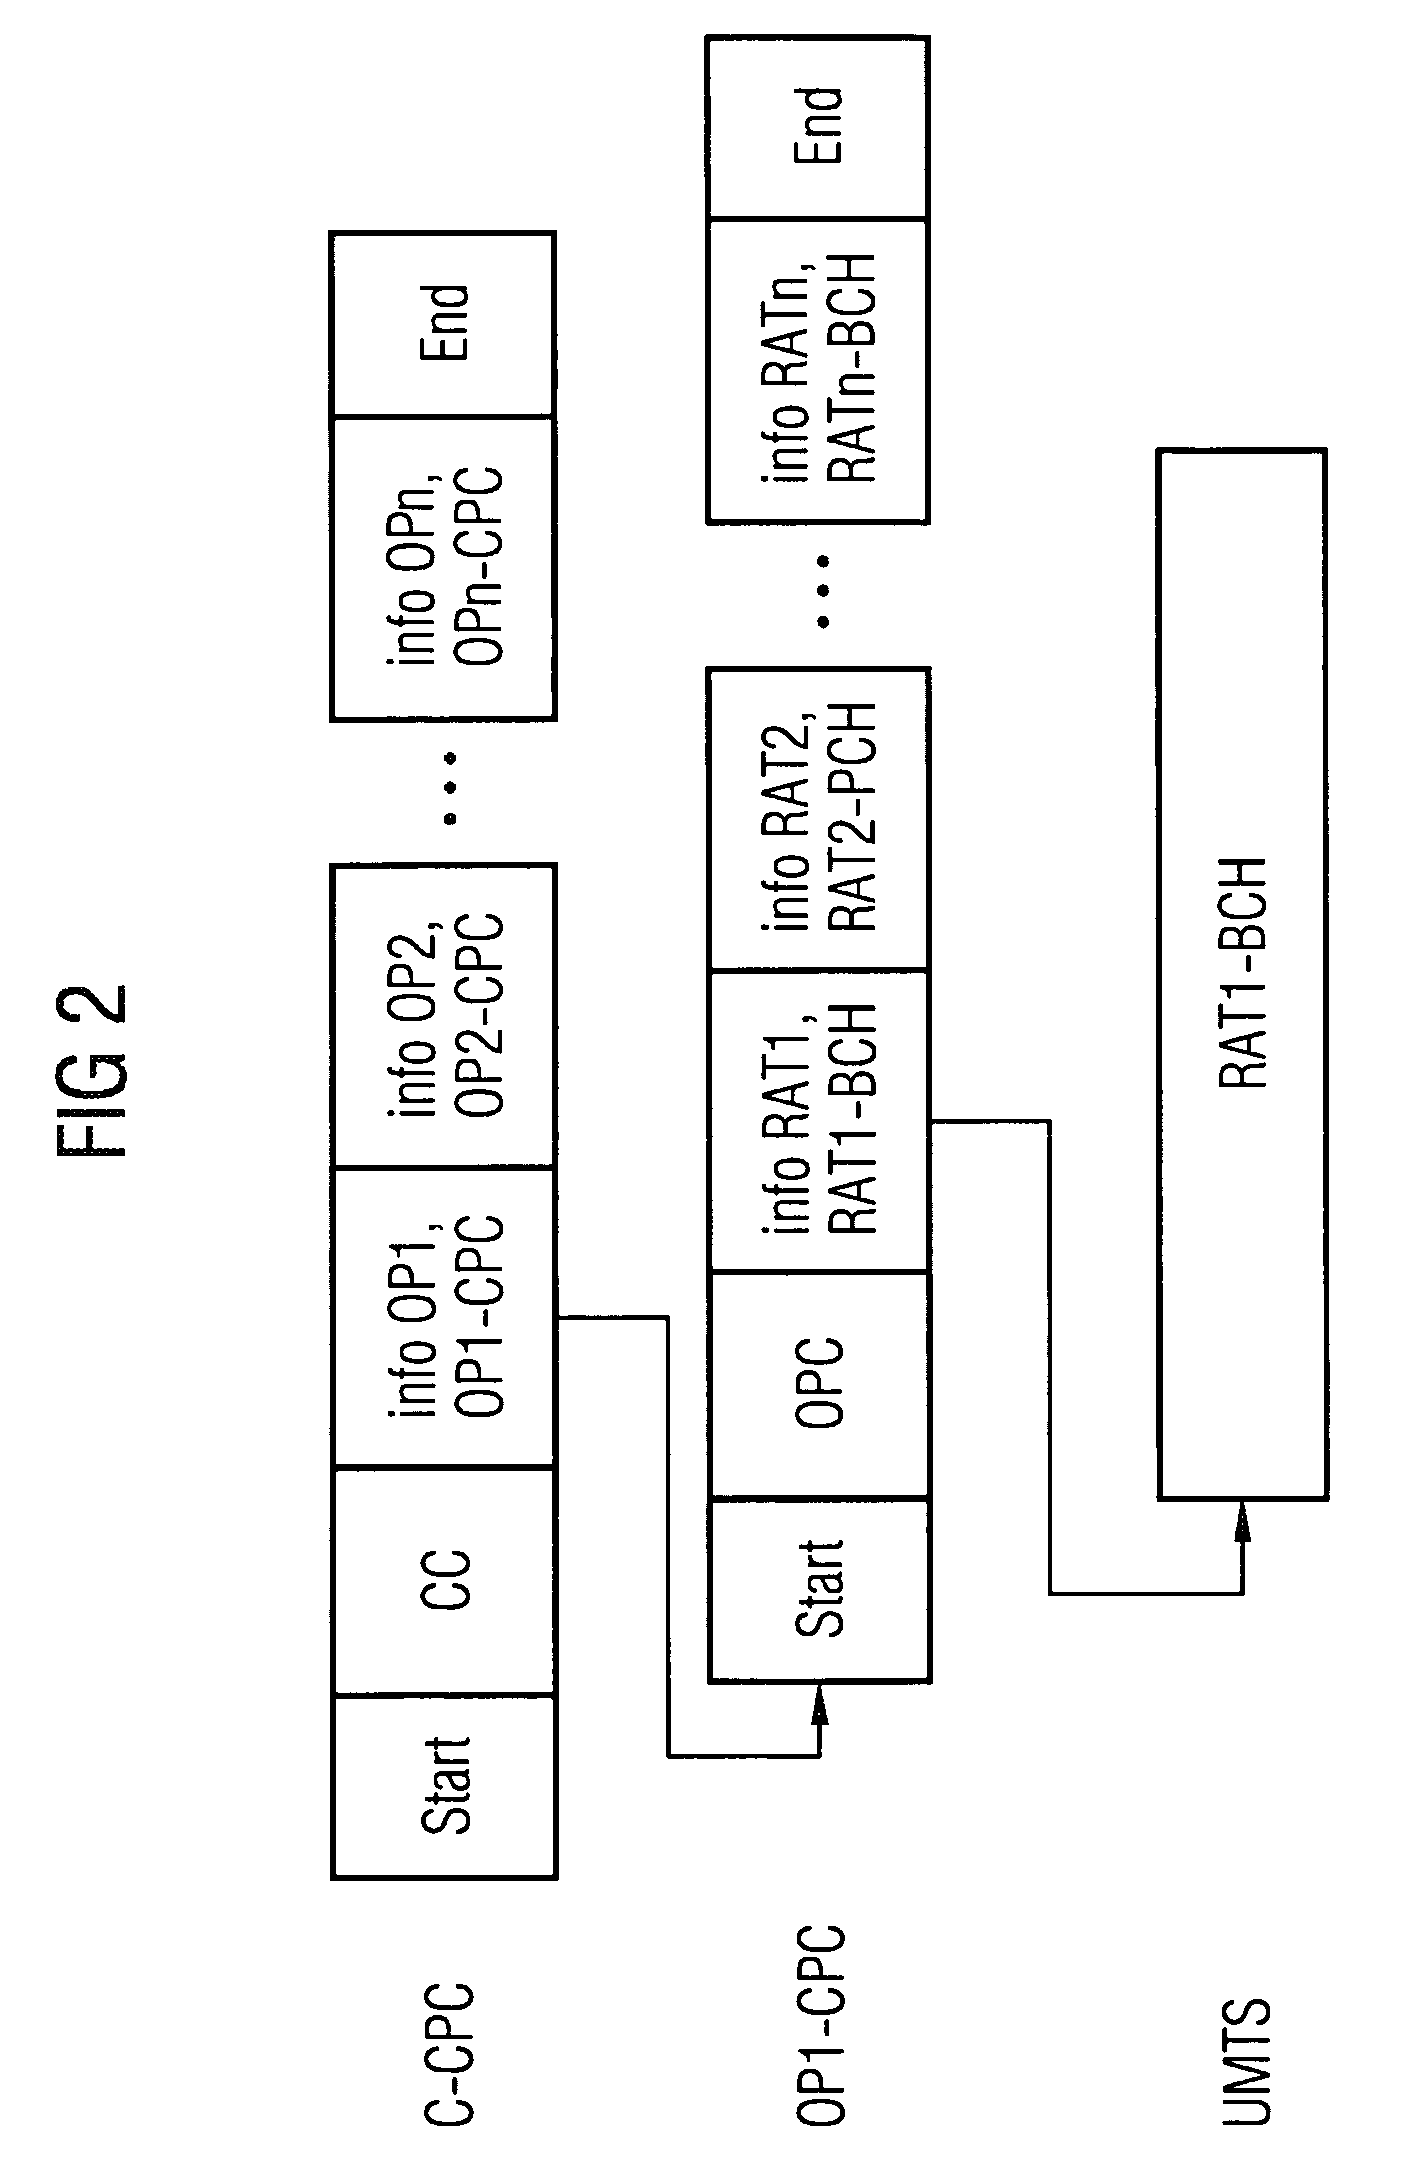 Establishment of a Connection in Radio Communication Systems